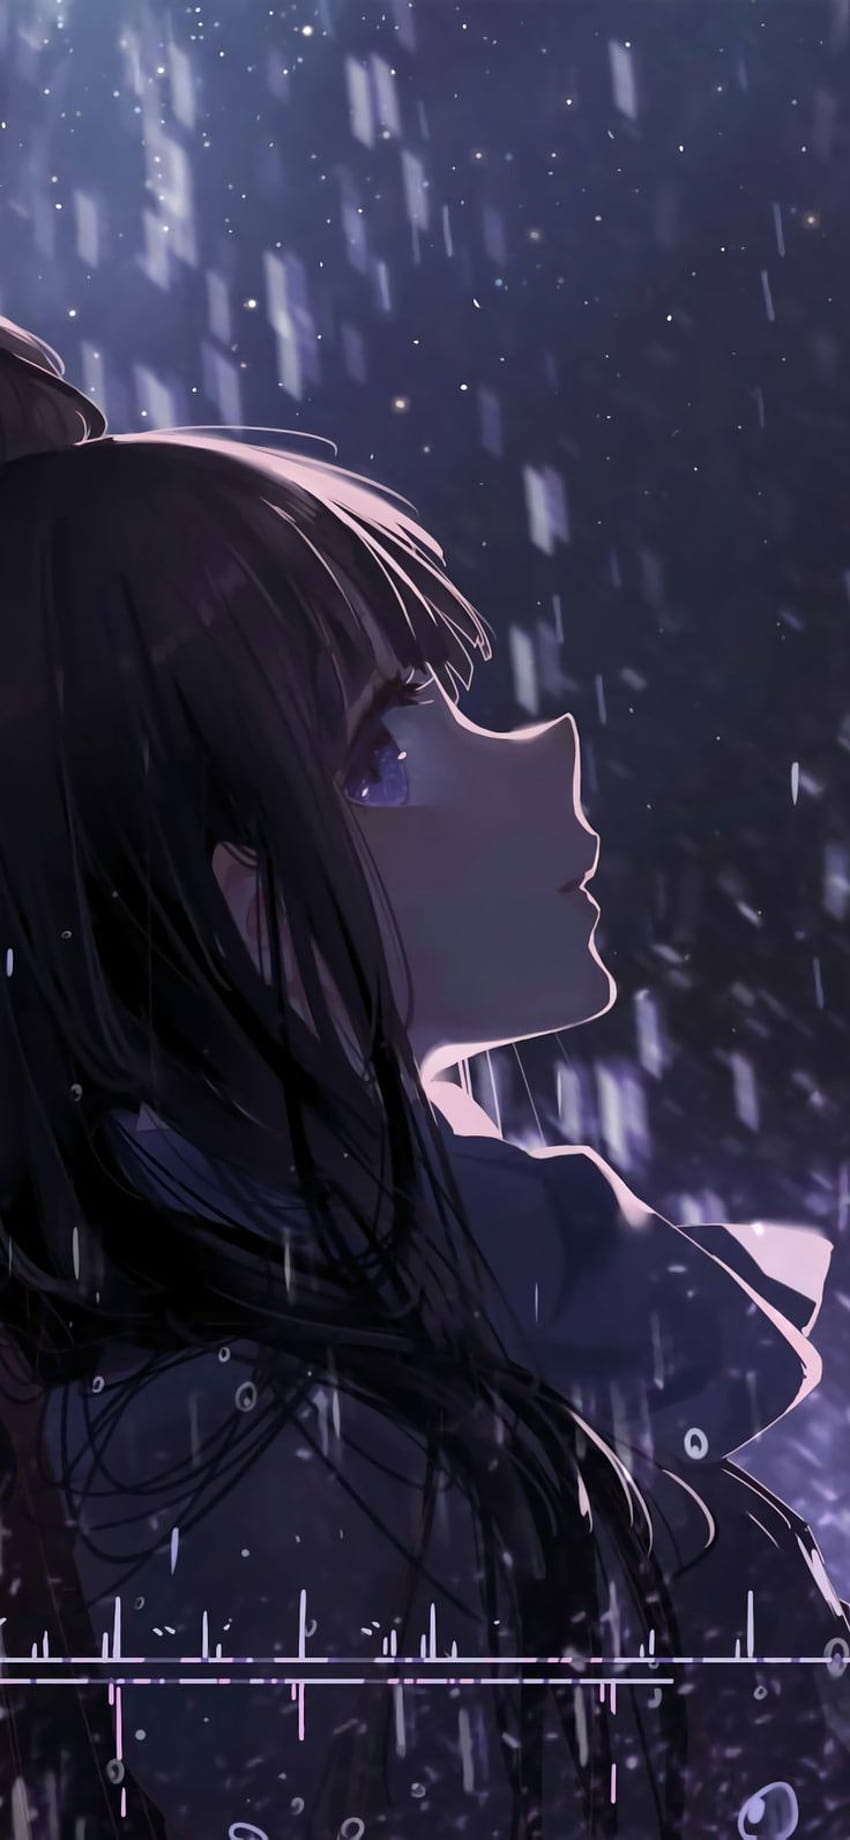 Depression Anime wallpaper by maxixns - Download on ZEDGE™ | 4b4c